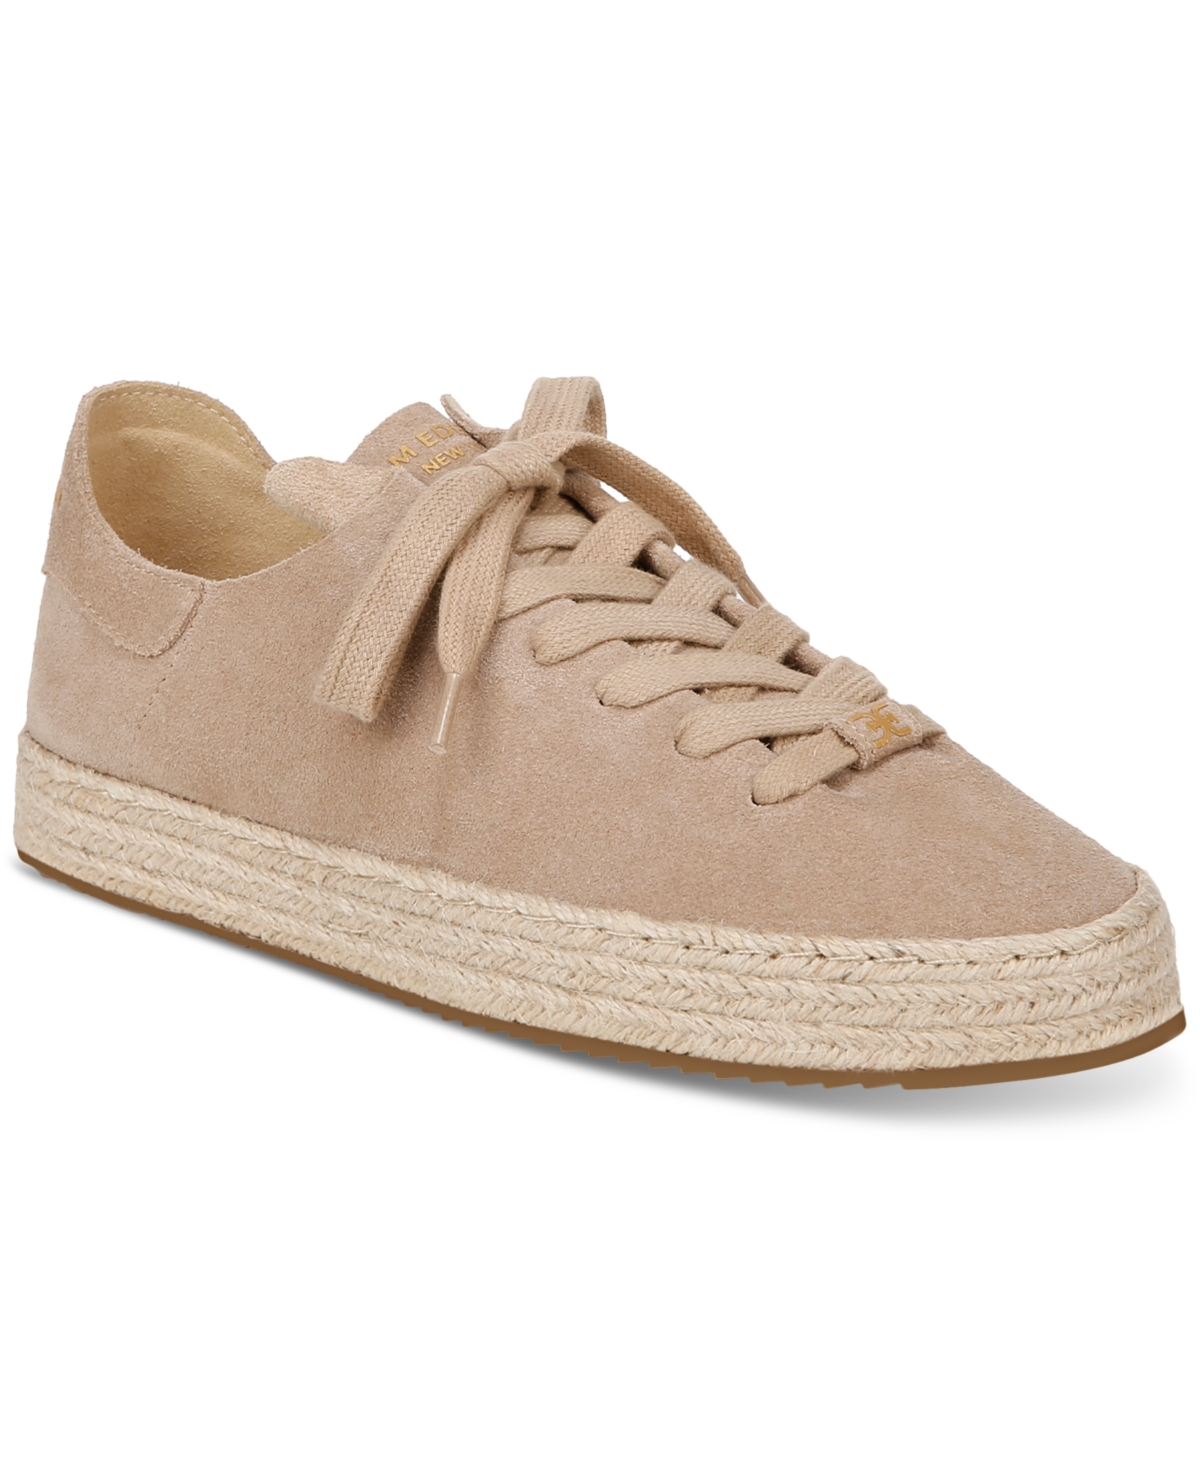 Sam Edelman Women's Poppy Lace-up Jute Espadrille Sneakers In Tuscan Taupe